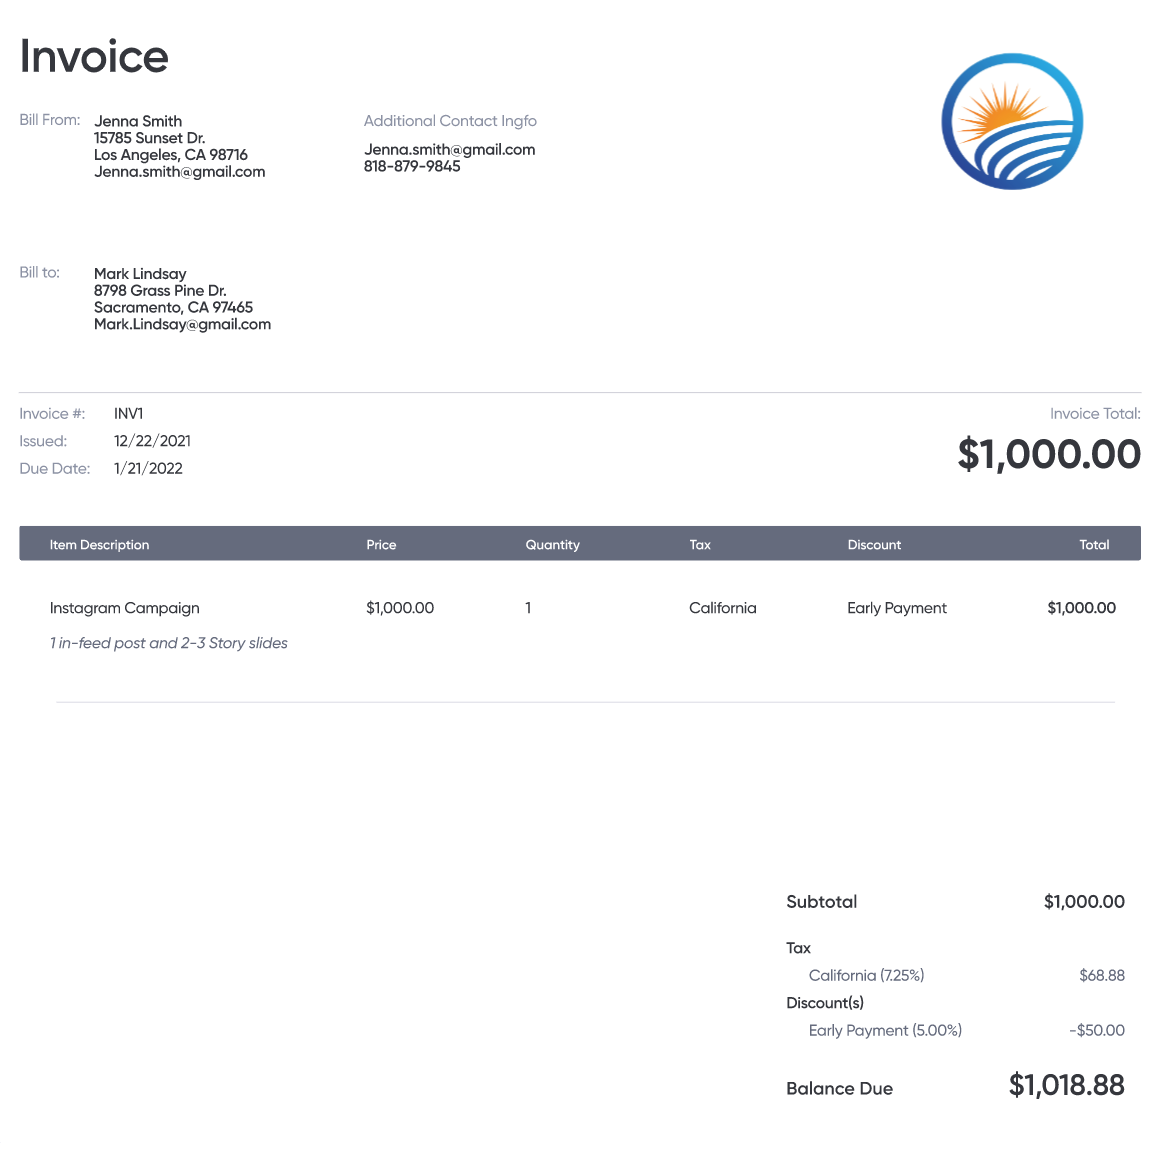 an example invoice document with a company logo and all the fields described above